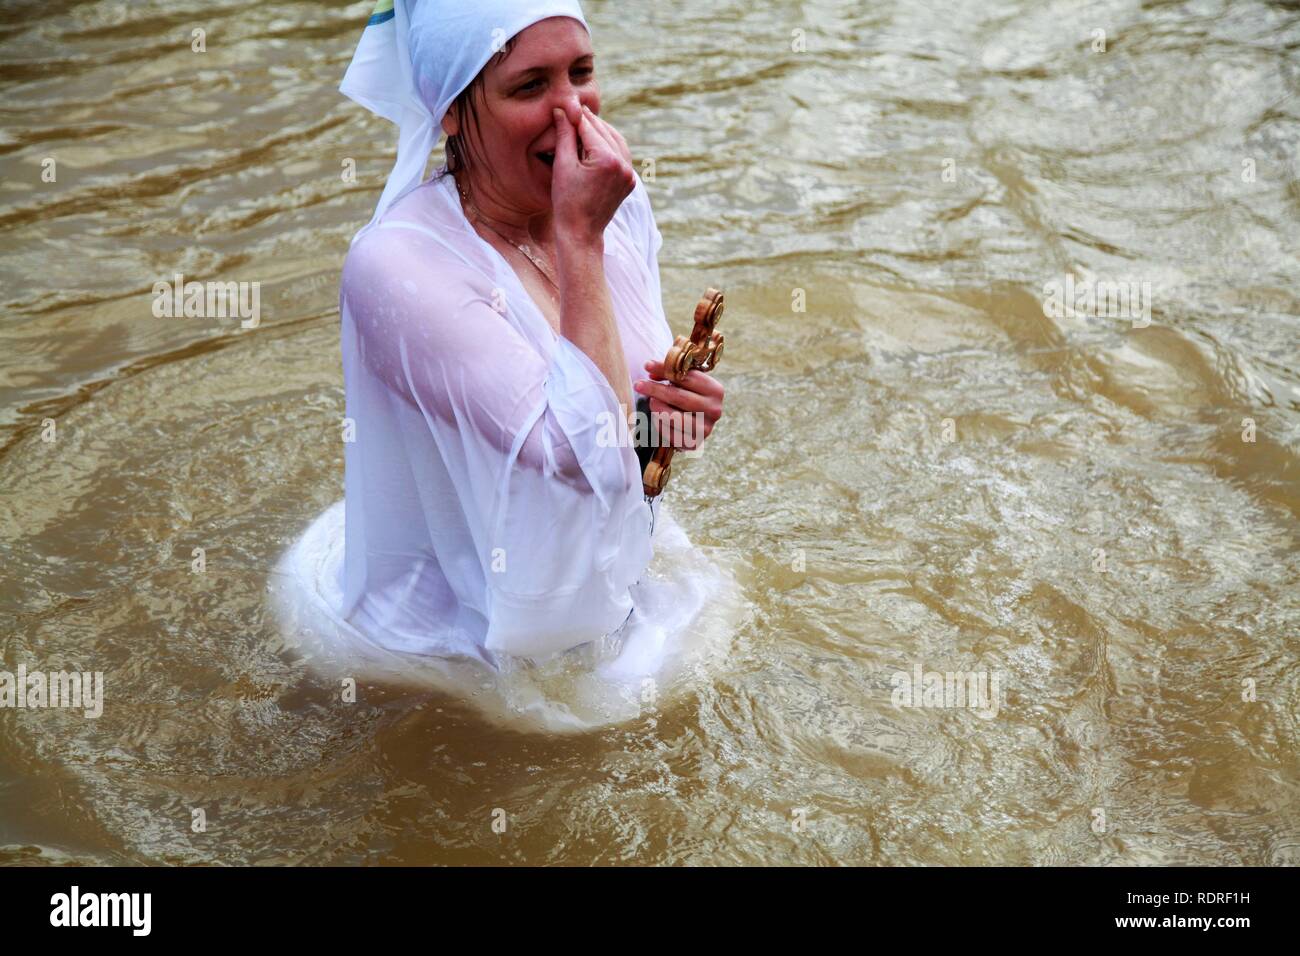 Jericho, West Bank. 18th Jan, 2019. Orthodox Christian pilgrims perform baptisms at Qasr al-Yahud baptism site on the Jordan River, during the Epiphany Day, near the West Bank city of Jericho, 18 January 2019. The ritual takes place at the site which is believed to be the place where Jesus Christ have been baptized by John the Baptist, one of the milestones in the gospel narrative of Jesus' life. Credit: Ahmad Arouri/APA Images/ZUMA Wire/Alamy Live News Stock Photo